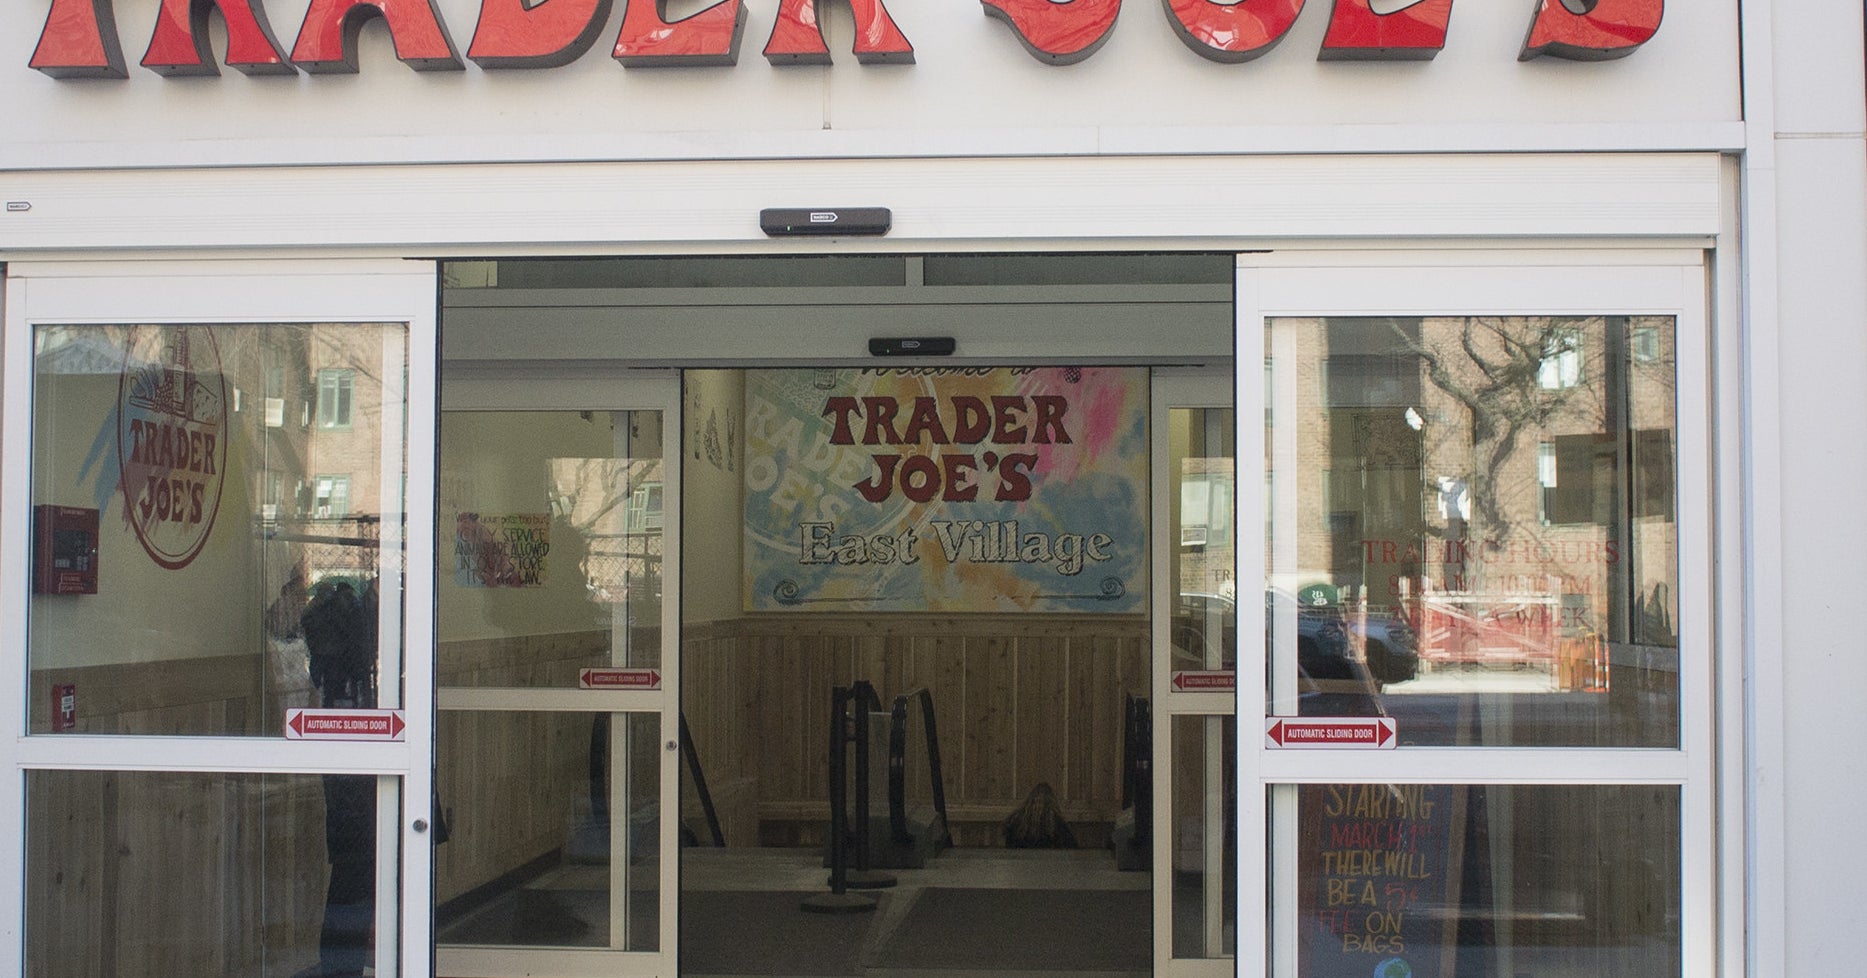 An employee of Joe’s dealer says he was fired for asking for better COVID-19 protection